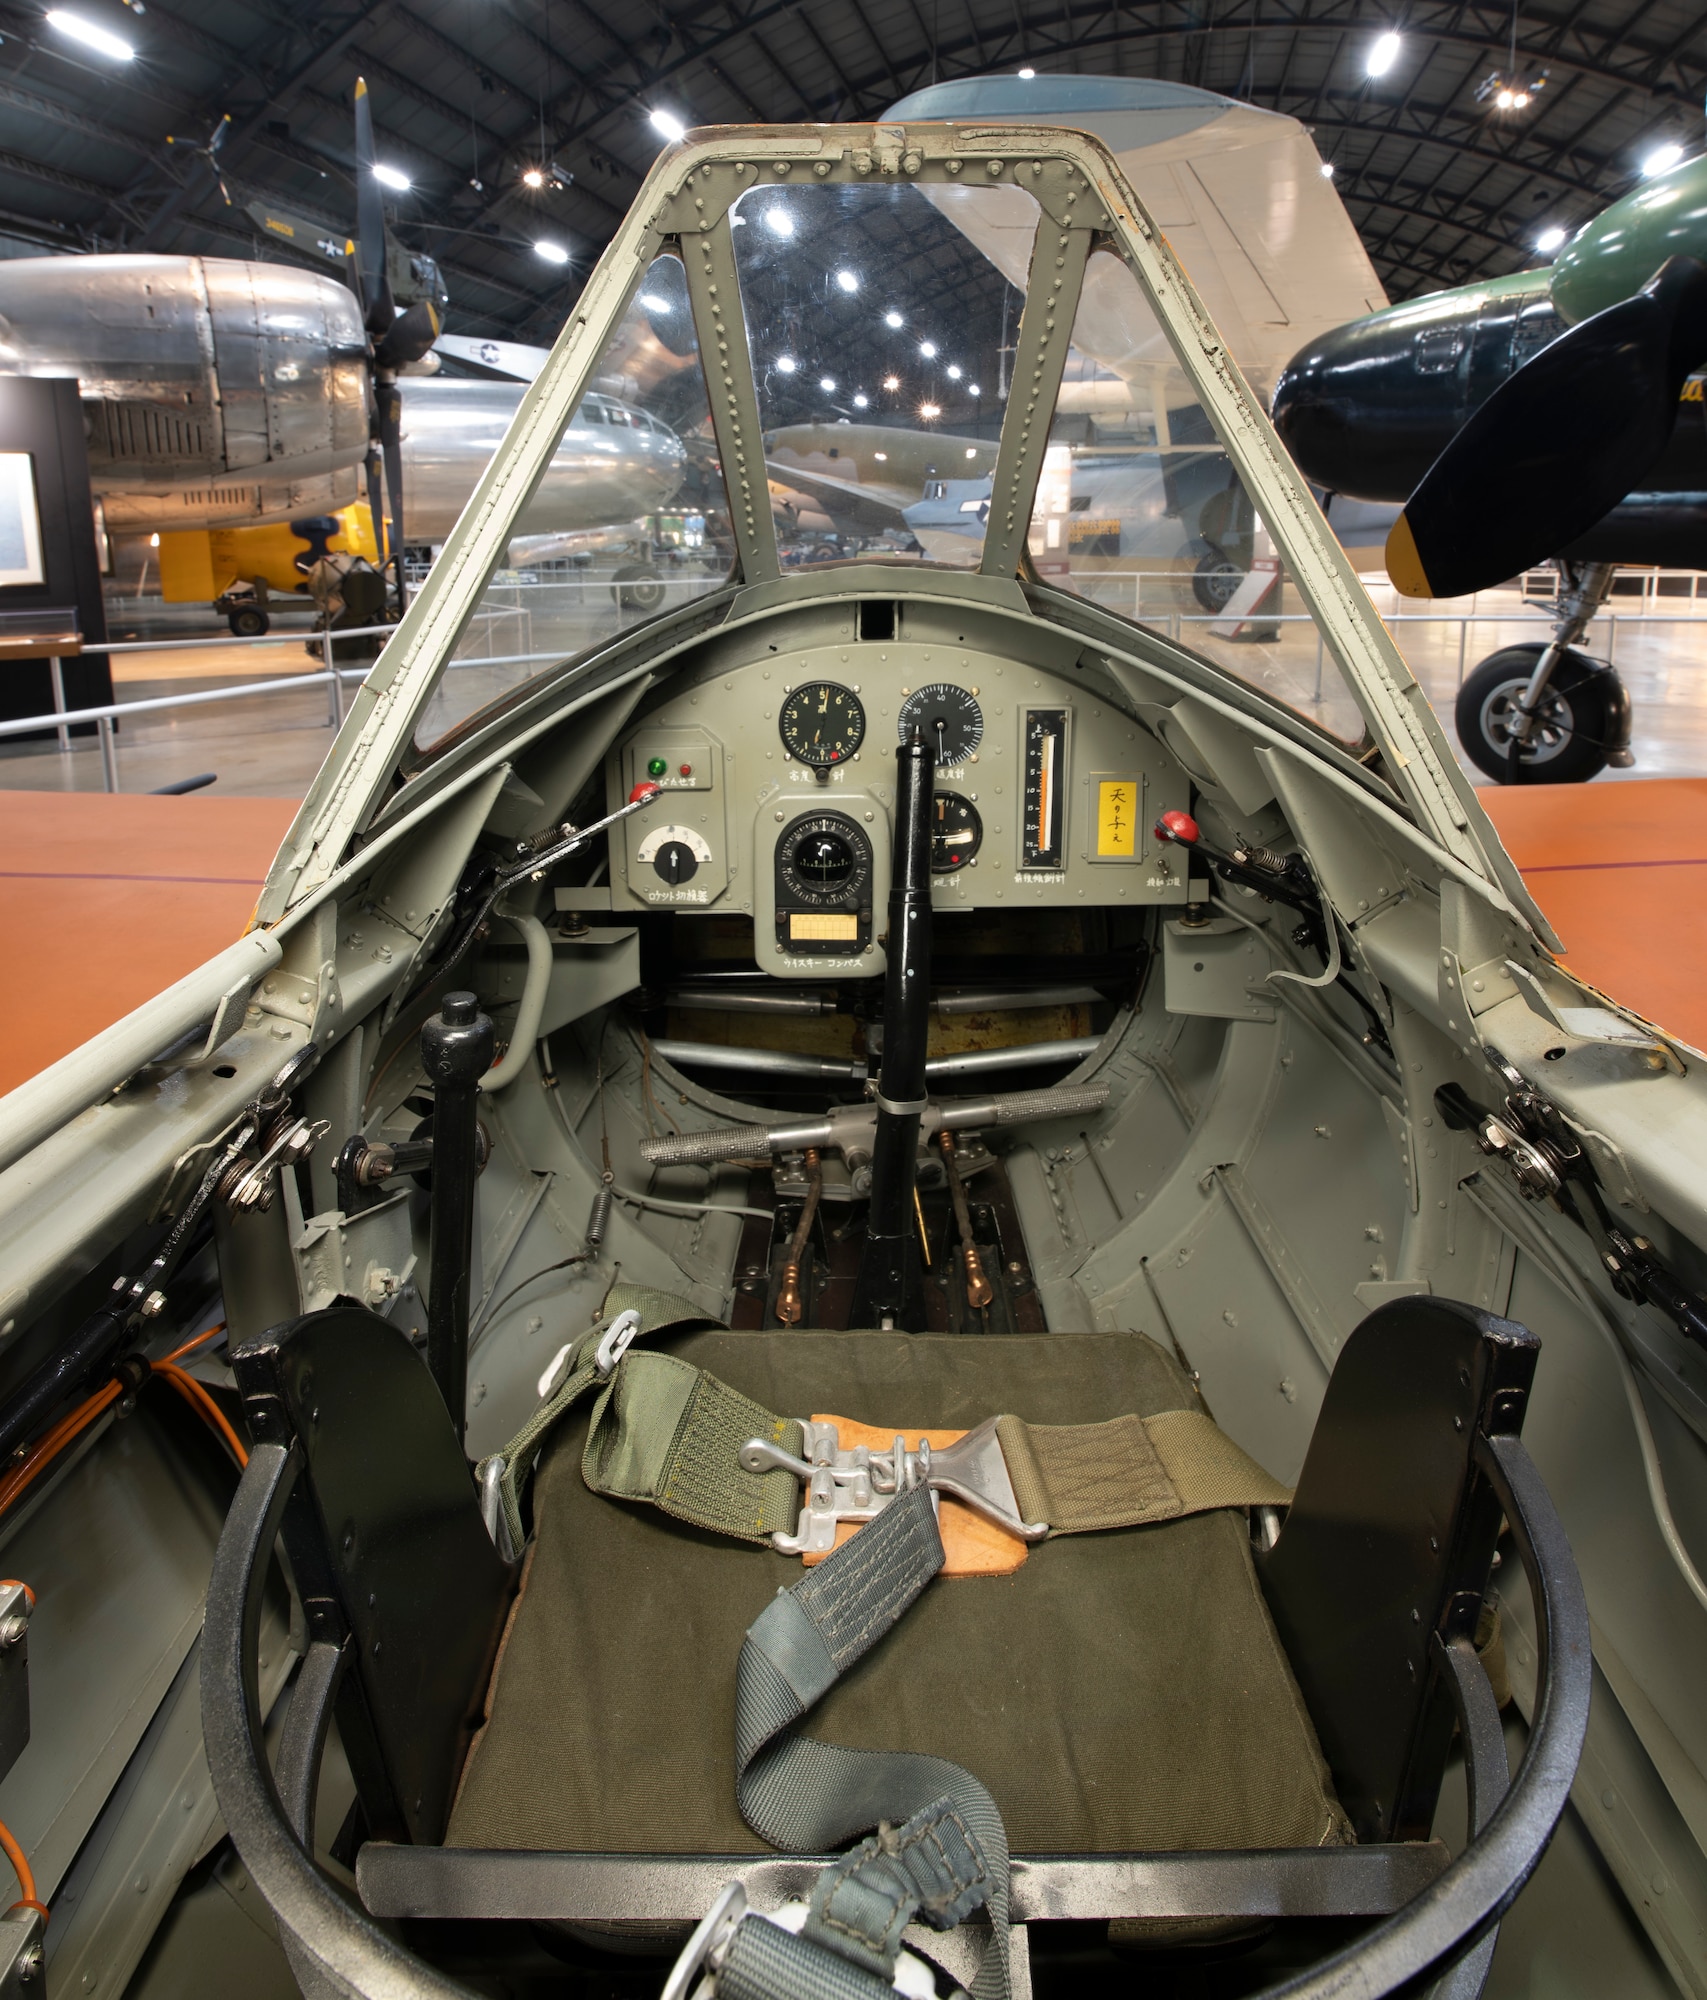 Interior view of the Yokosuka MXY7-K1 Ohka cockpit at the National Museum of the U.S. Air Force World War II Gallery.